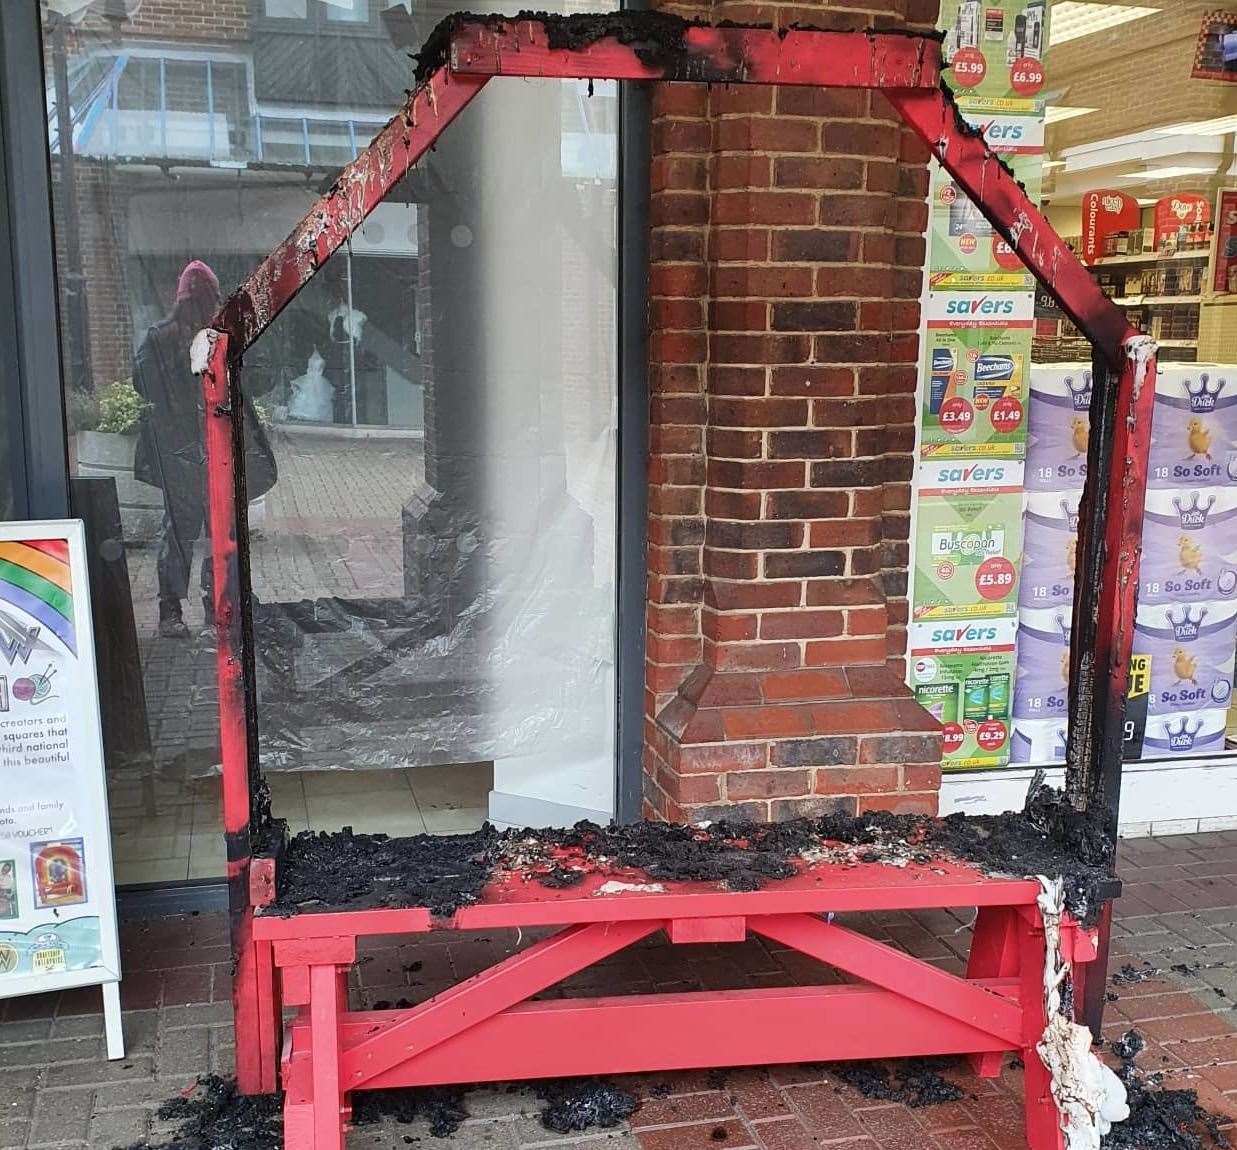 The community bench was targeted in October. Picture: Made In Ashford